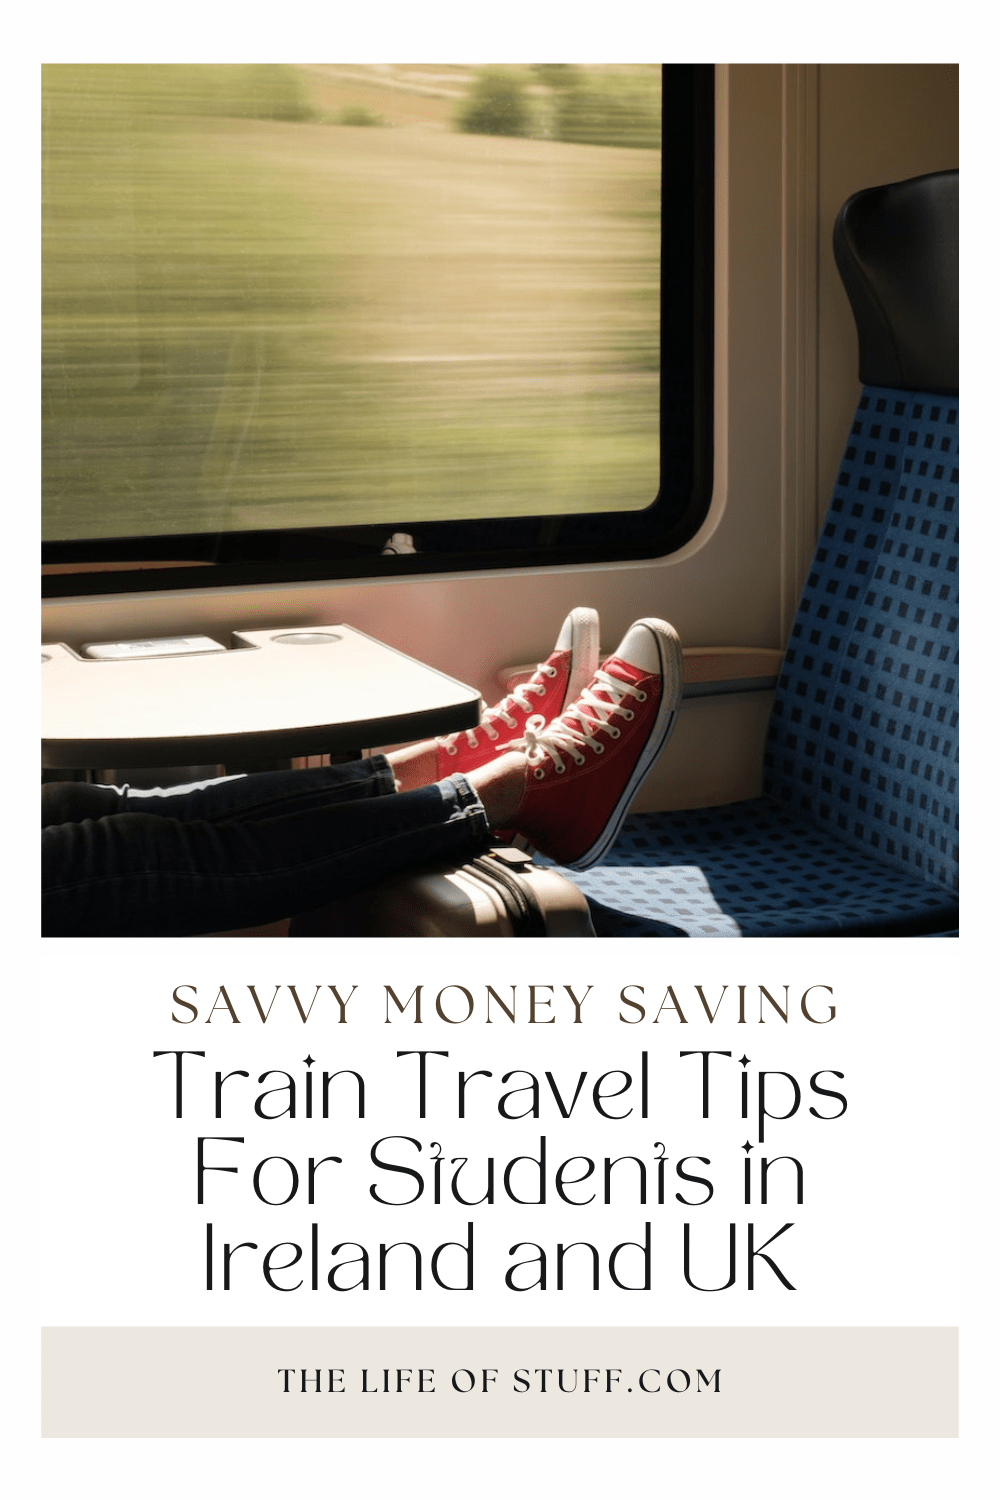 Money-Saving Train Travel Tips For Students - The Life of Stuff